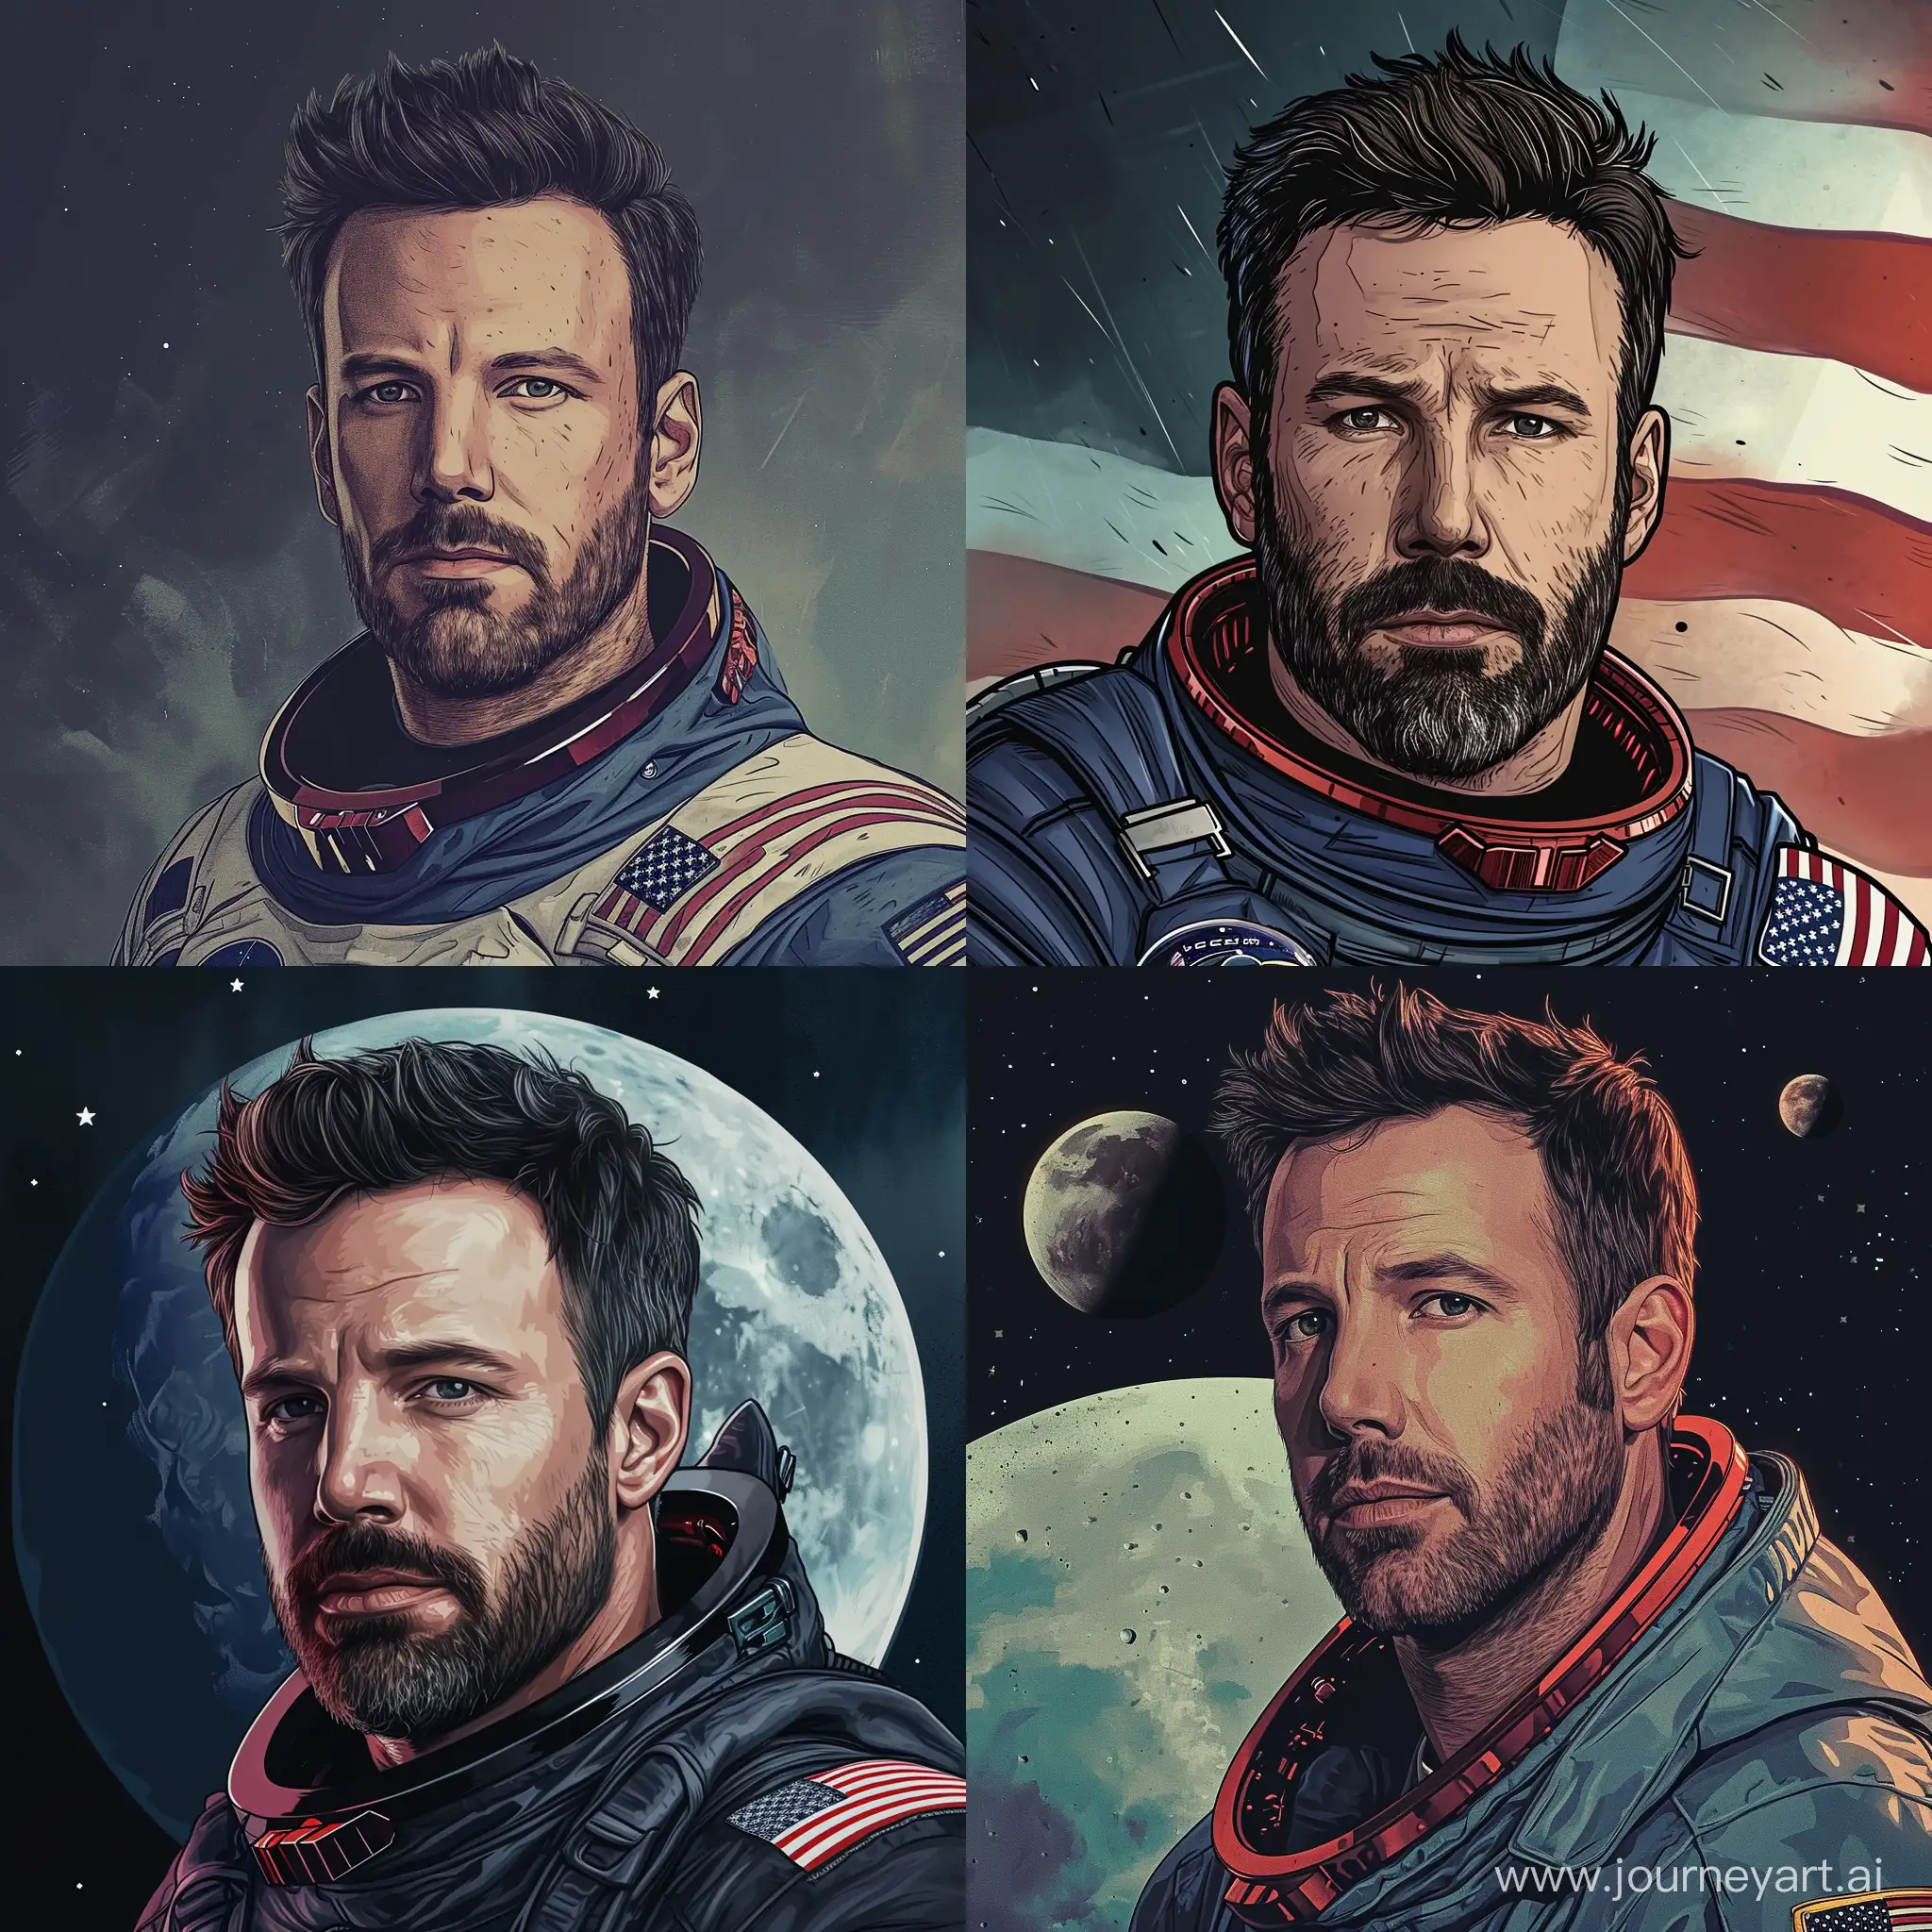 Ben-Affleck-as-the-First-Man-on-the-Moon-in-90s-Cartoon-Style